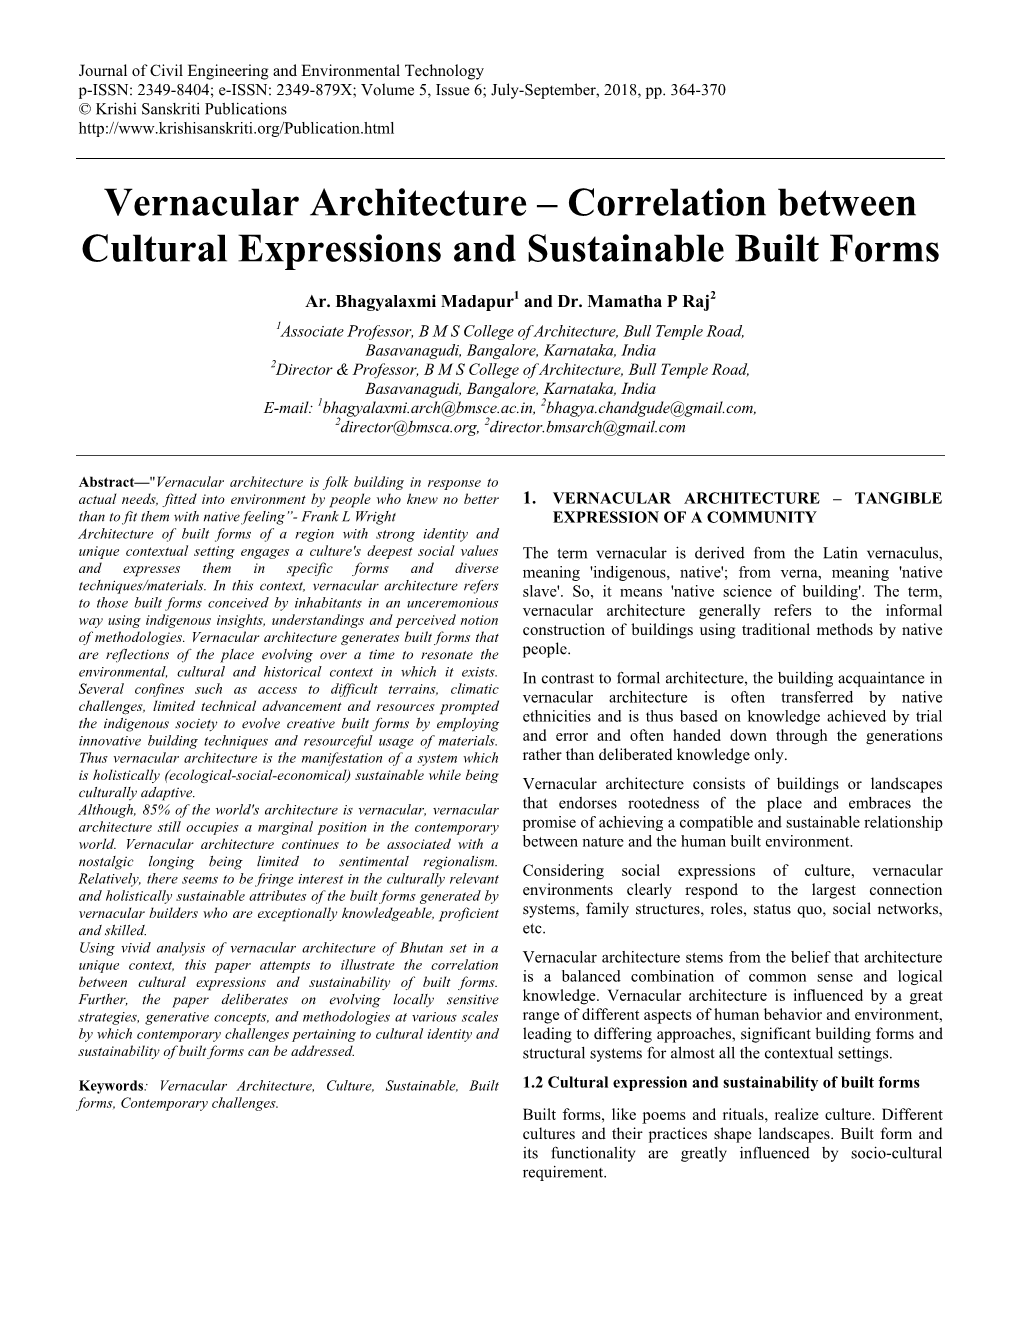 Vernacular Architecture – Correlation Between Cultural Expressions and Sustainable Built Forms